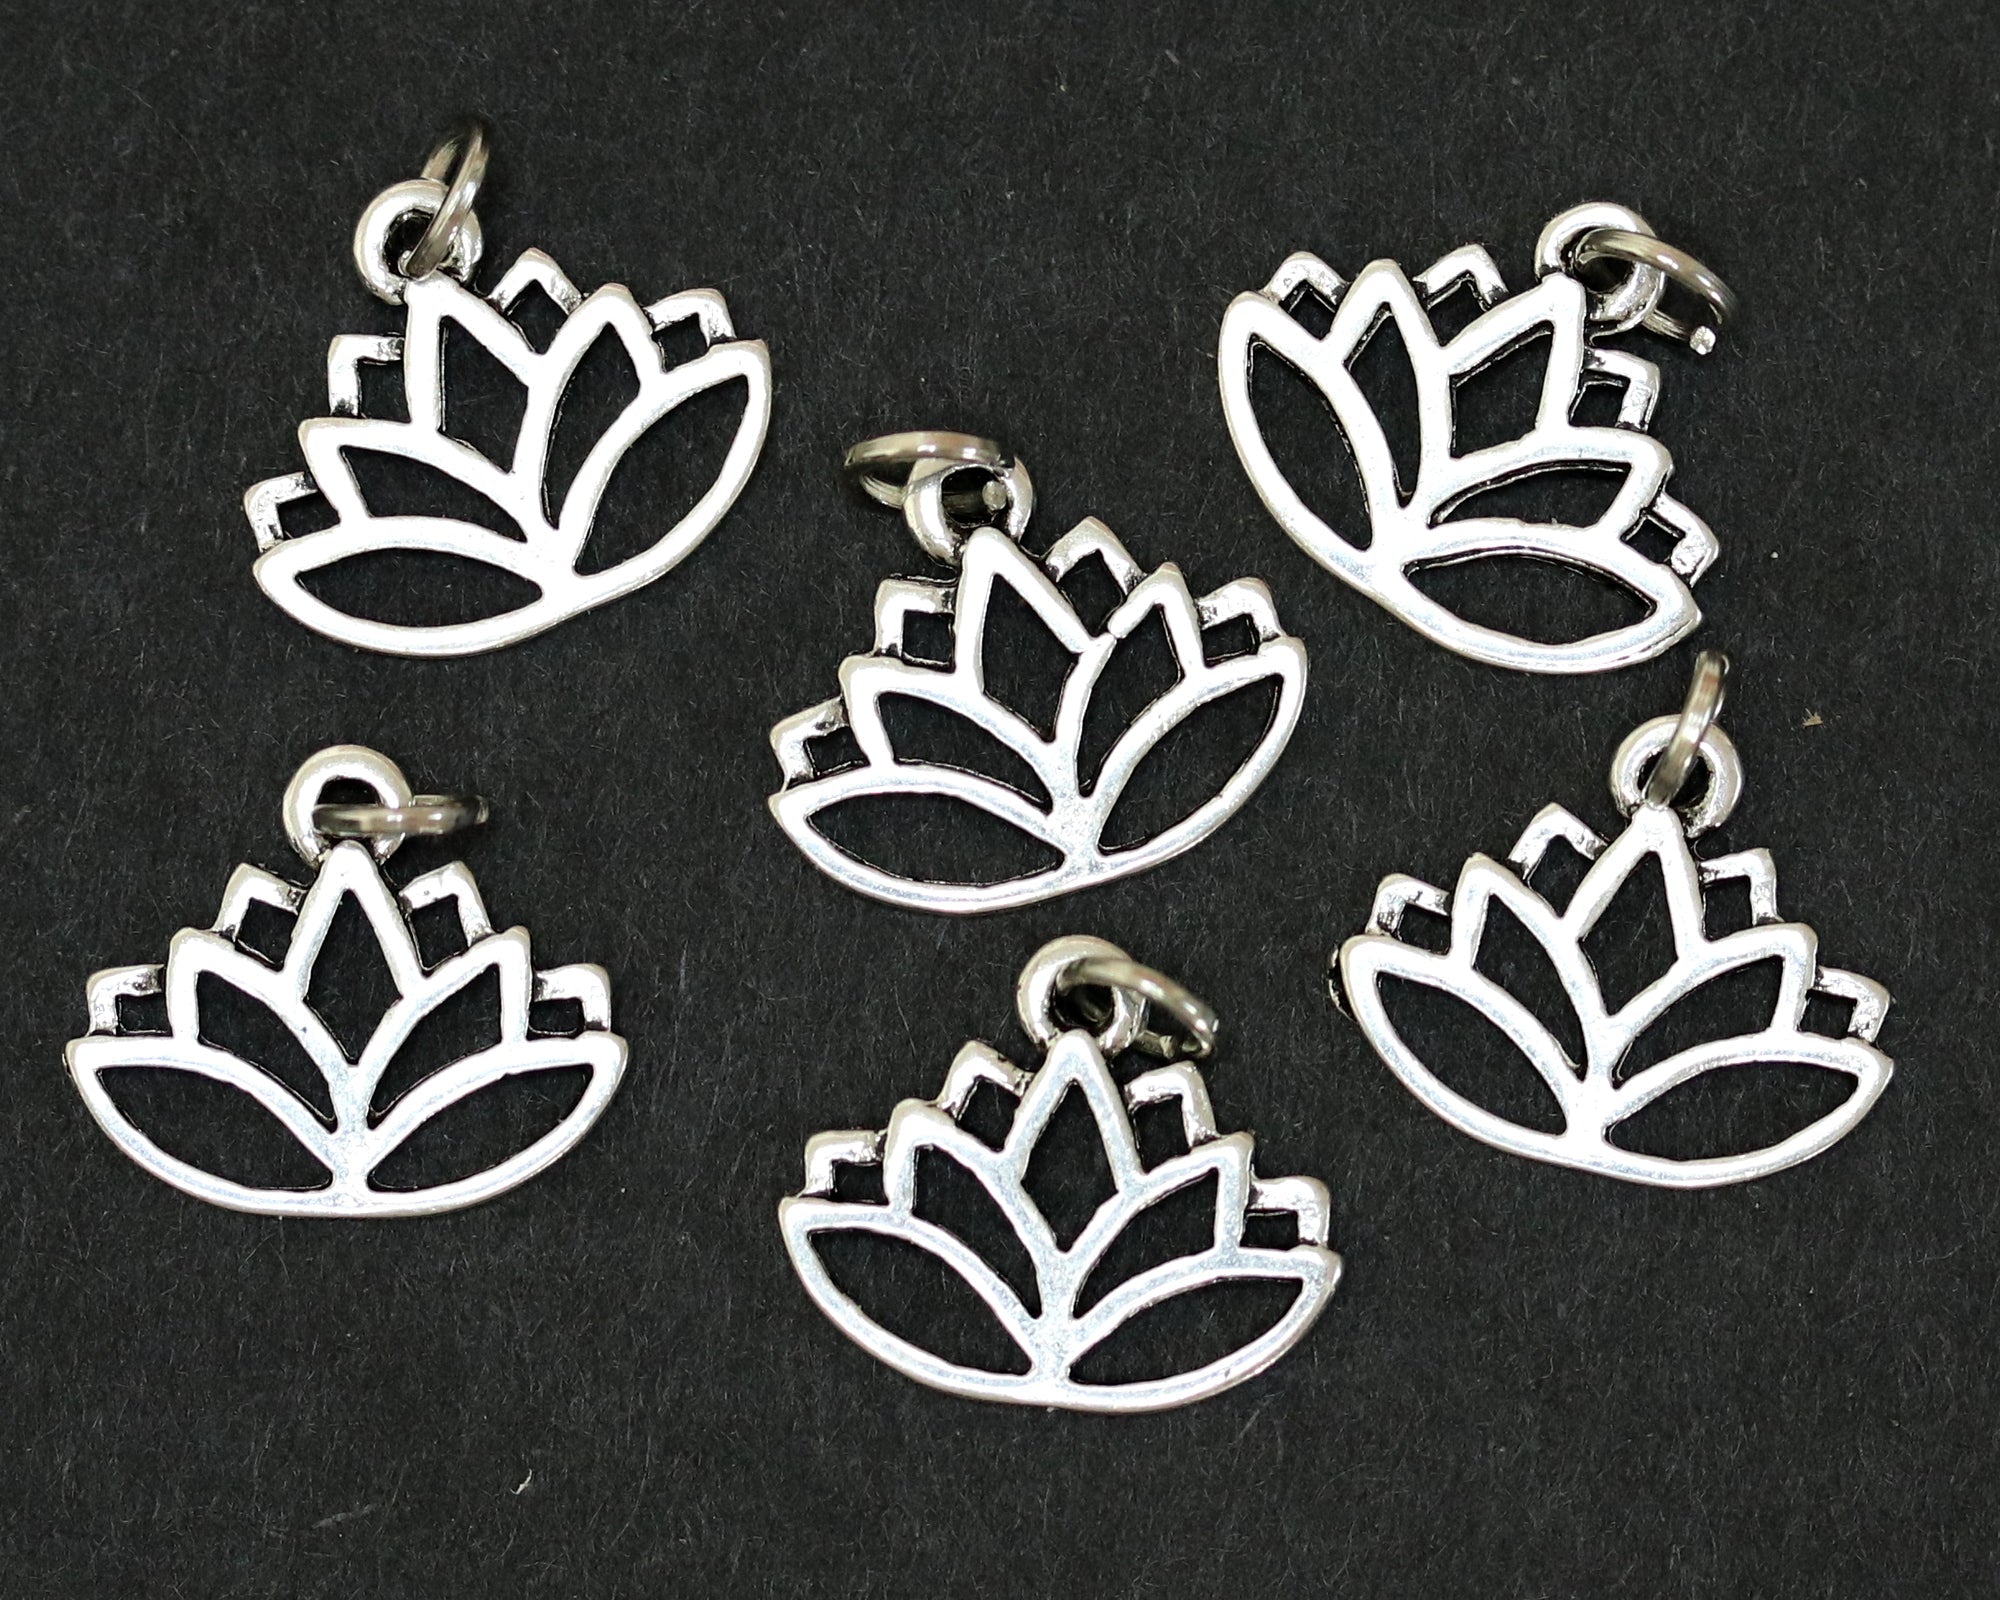 Lotus charm 14x16mm antique silver plated metal alloy pendant